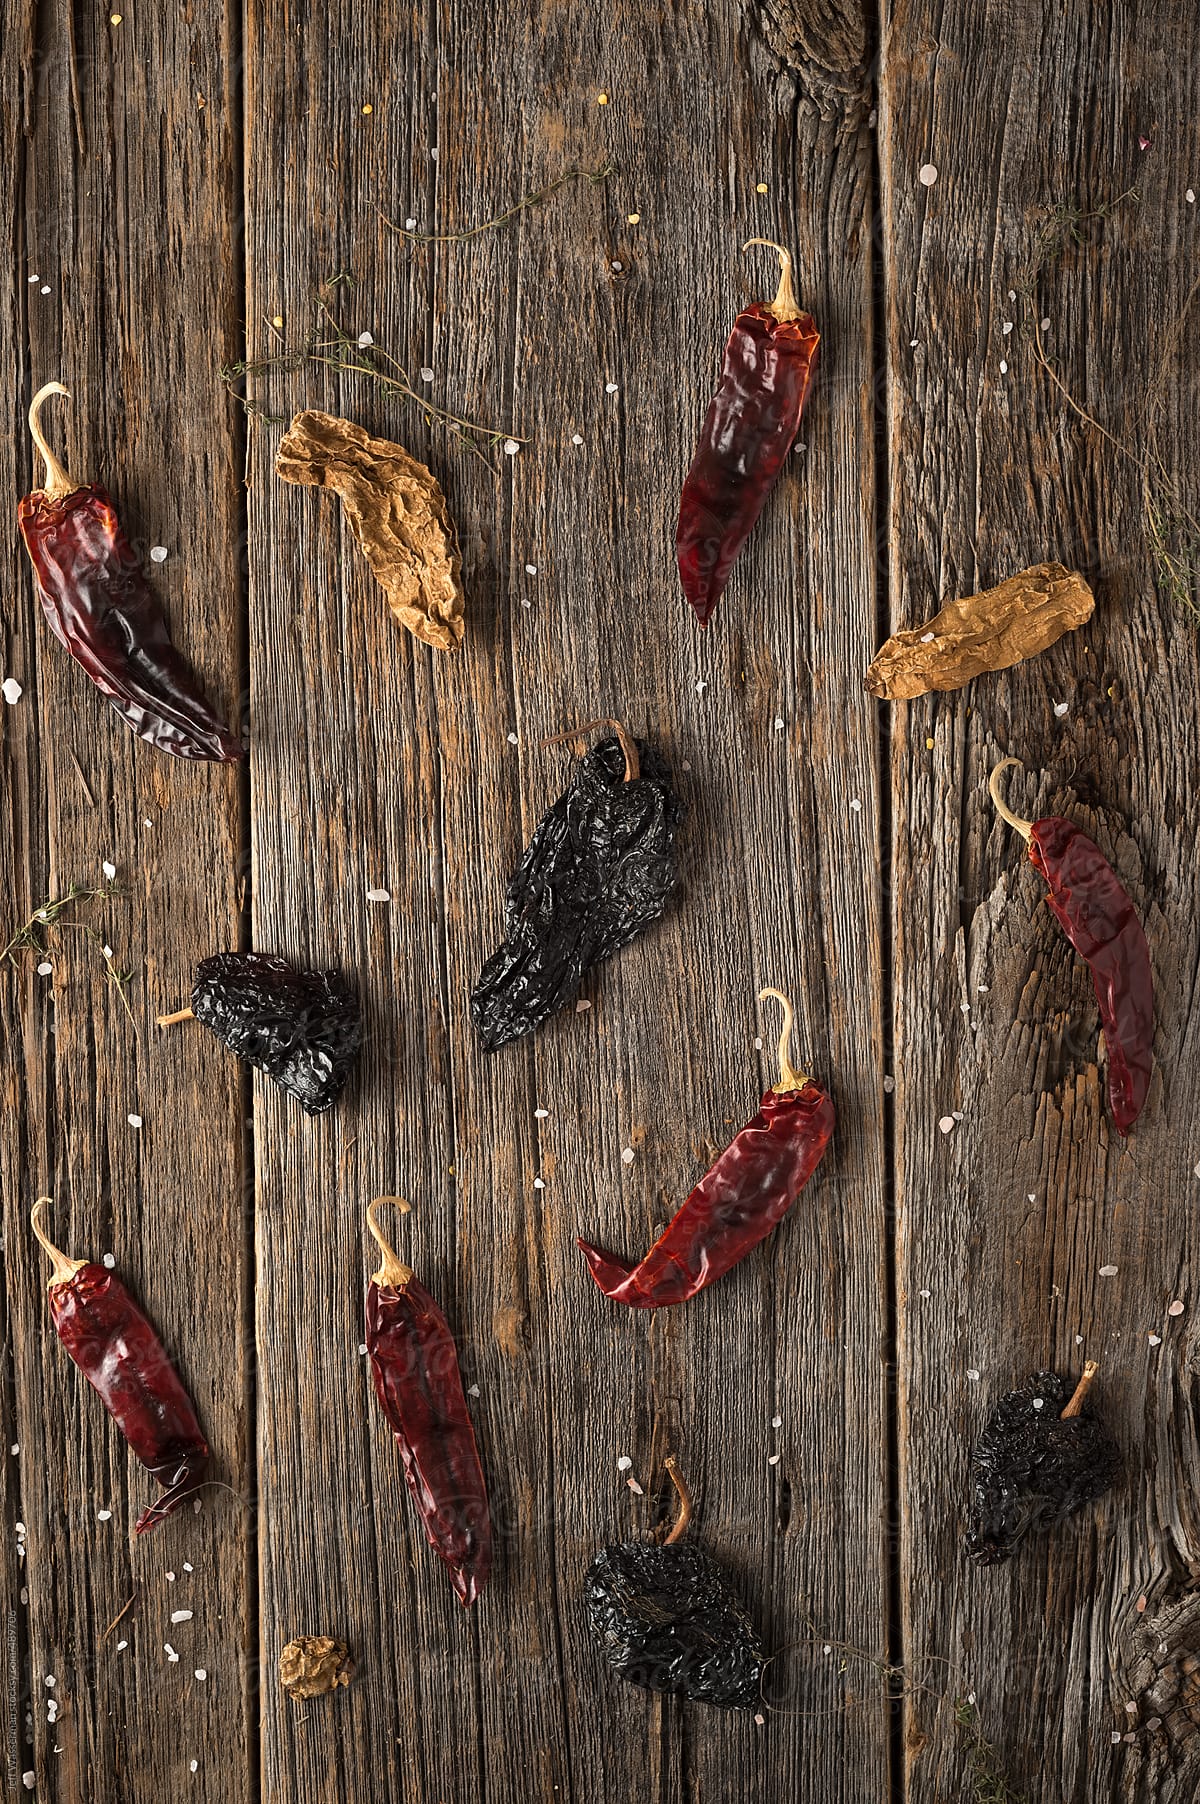 Mexican Food Ingredients: Ancho, Chipotle, Guarjillo, Chile Peppers